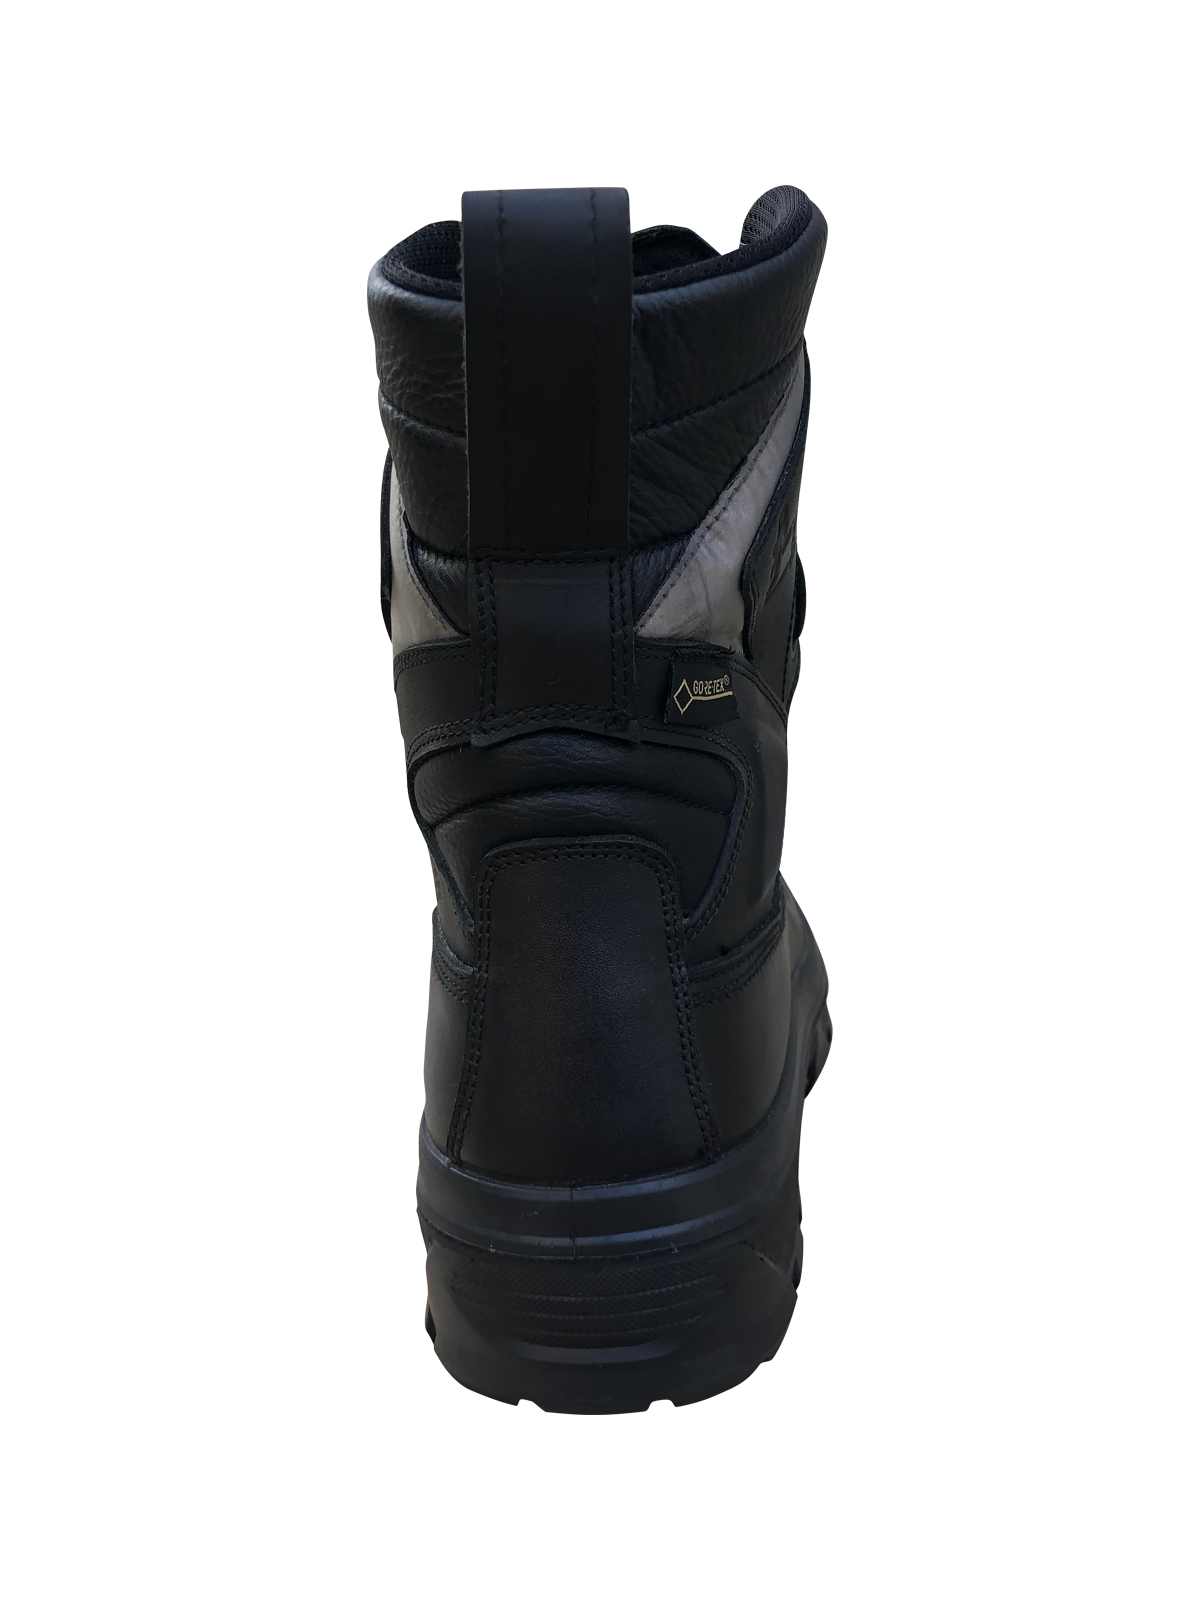 Hades Structural Fire Boots | Pac Fire Australia